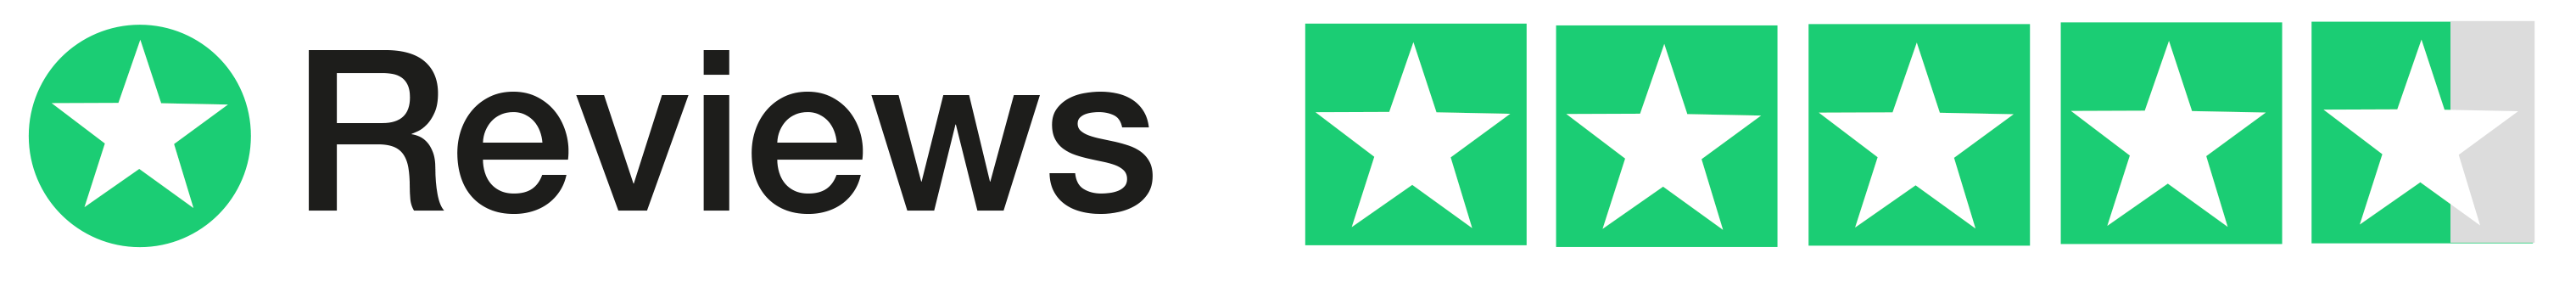 review-stars1.png